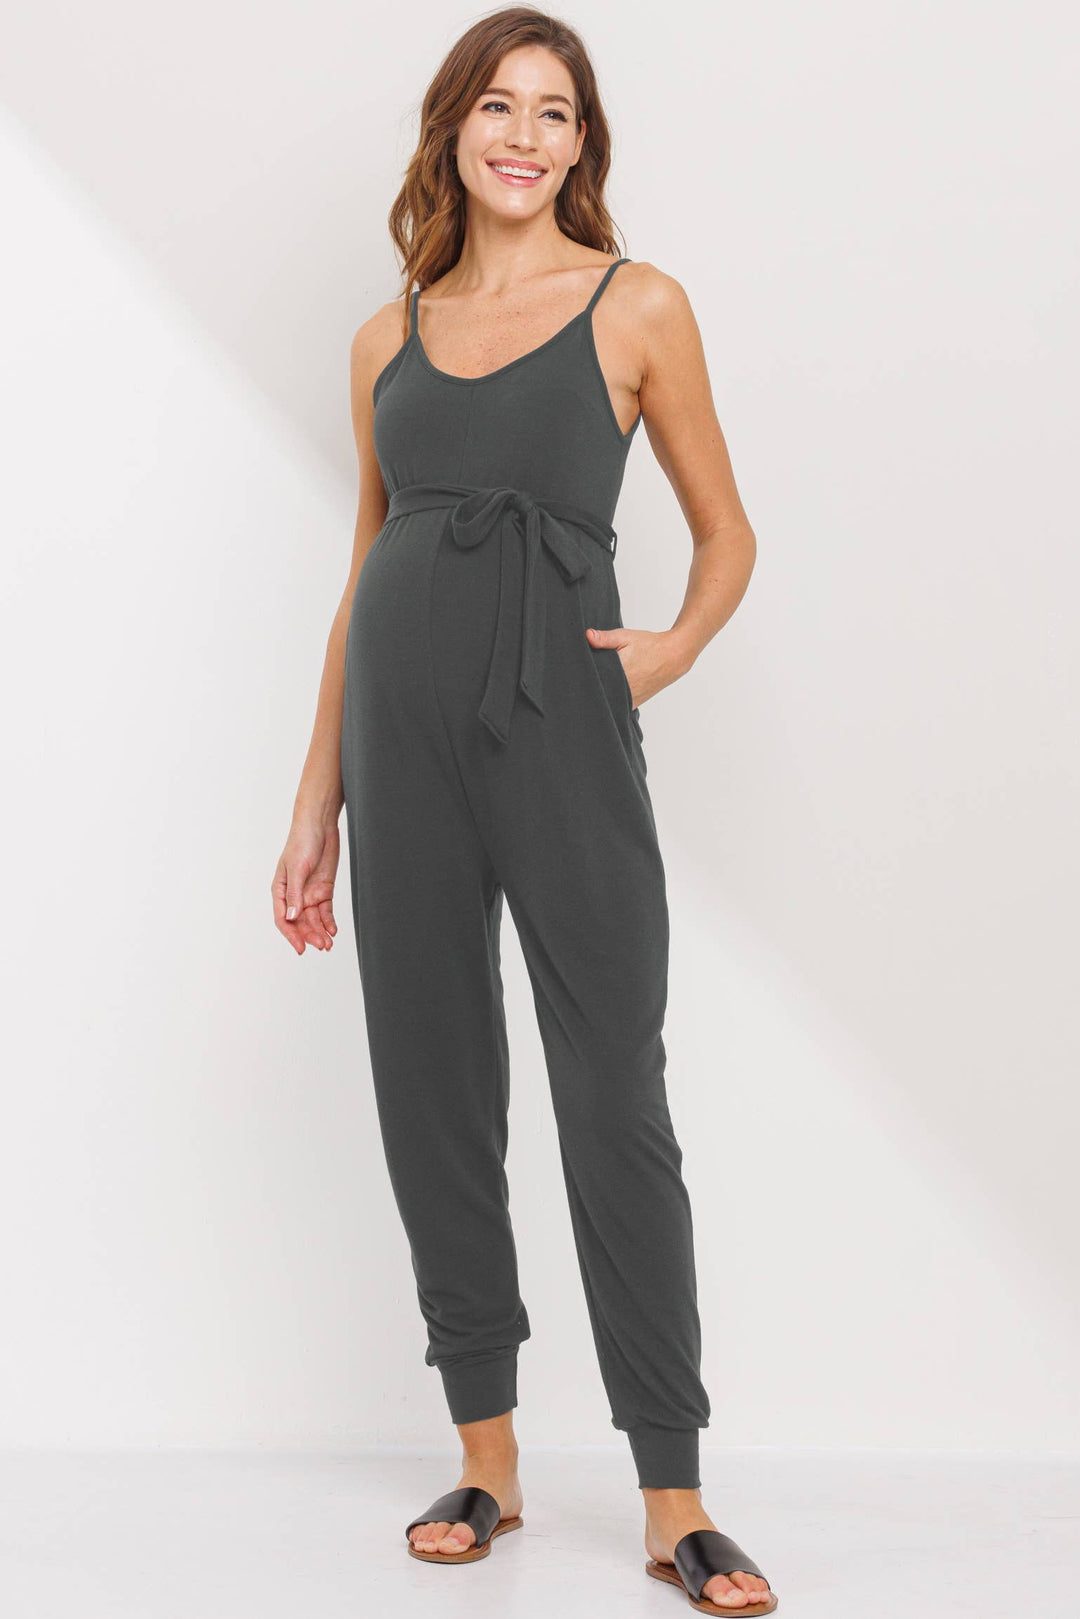 Hello Miz - Solid Belted Maternity Cami Jogger Jumpsuit